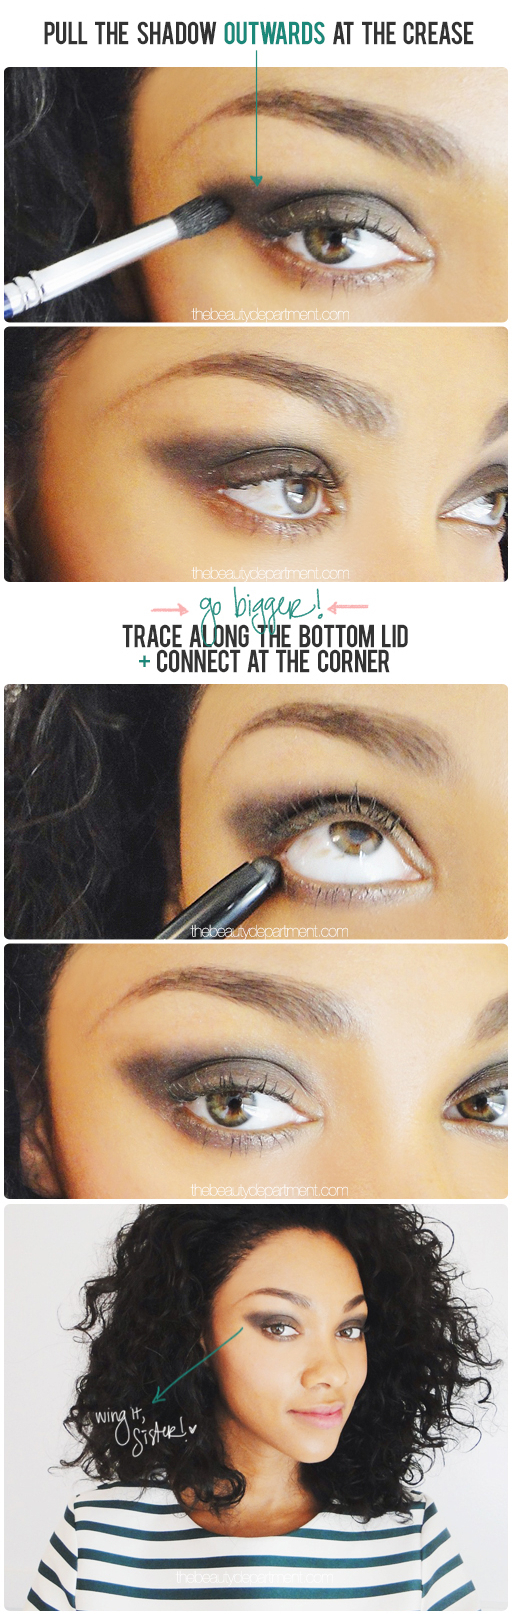 Makeup To Elongate Eyes The Beauty Department Your Daily Dose Of Pretty Elongate The Lid